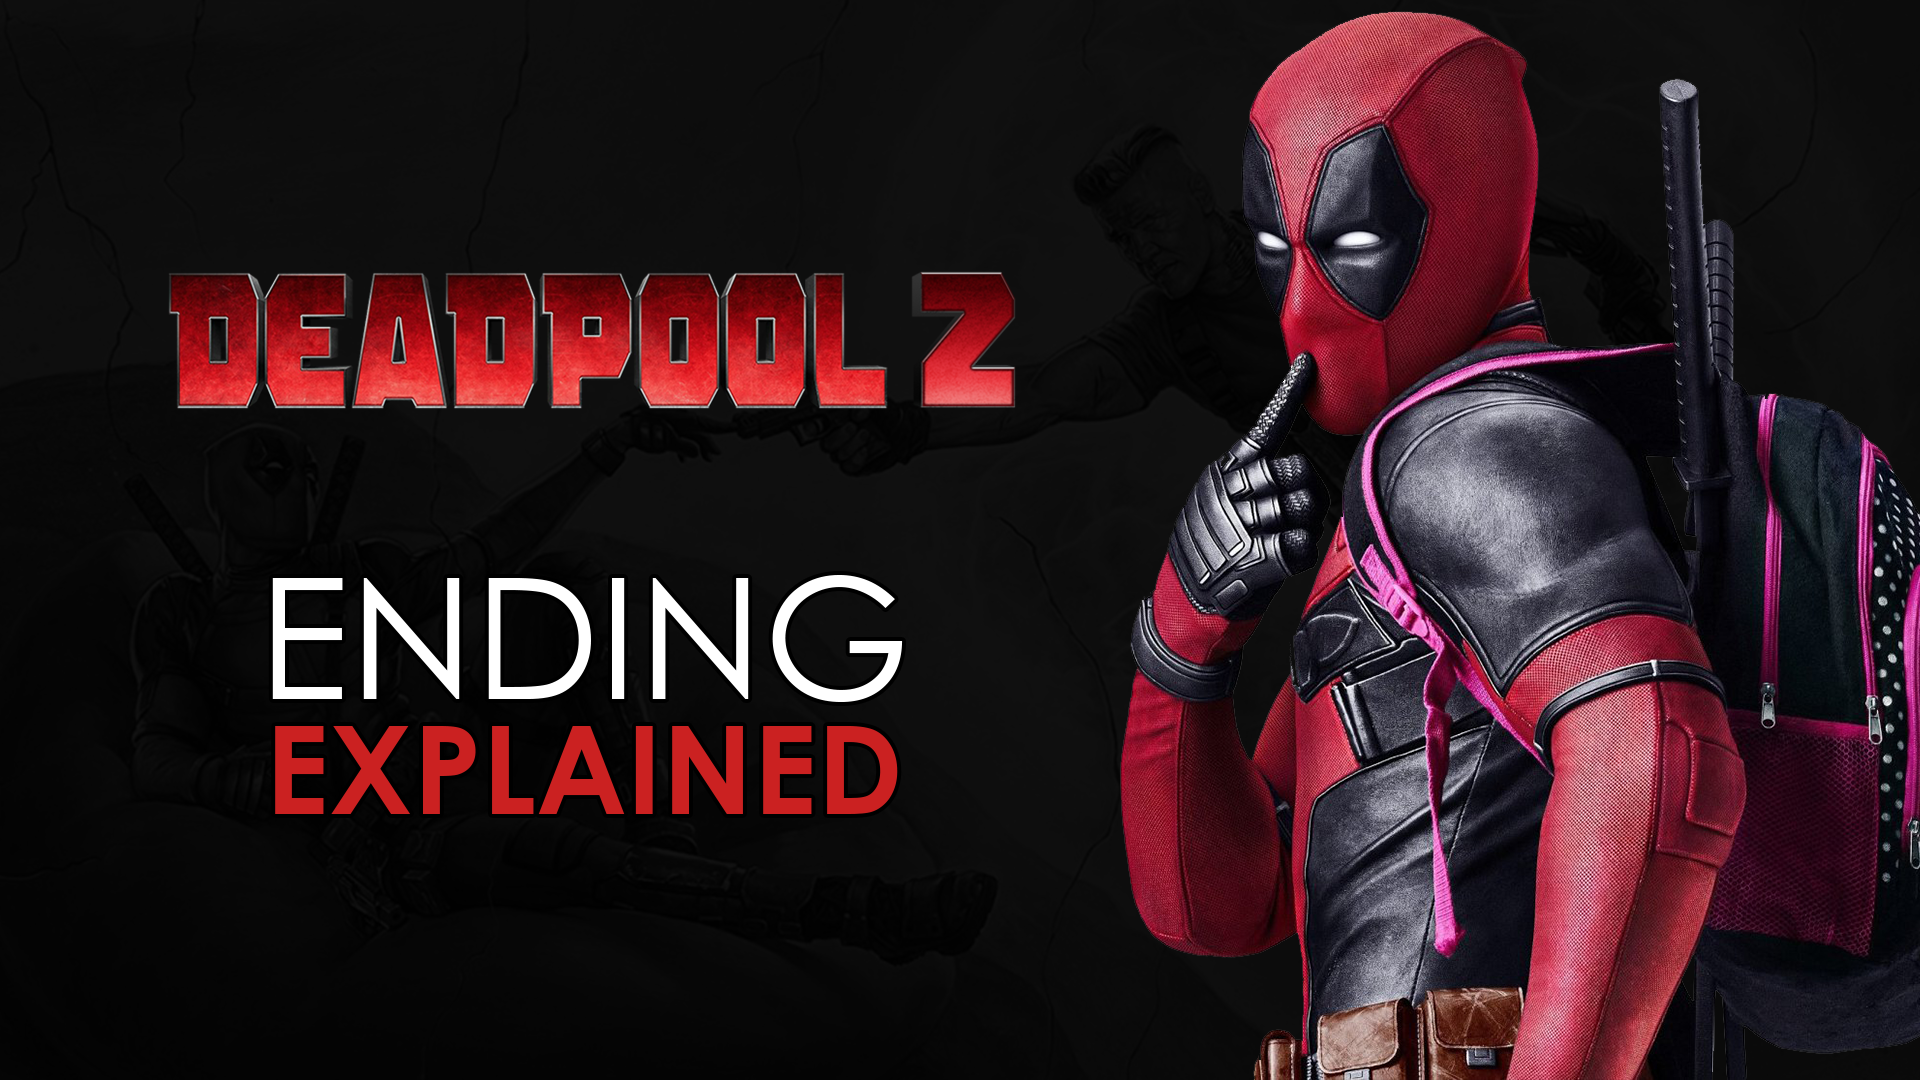 deadpool 2 ending explained and what the post credit scene means full spoiler talk and review